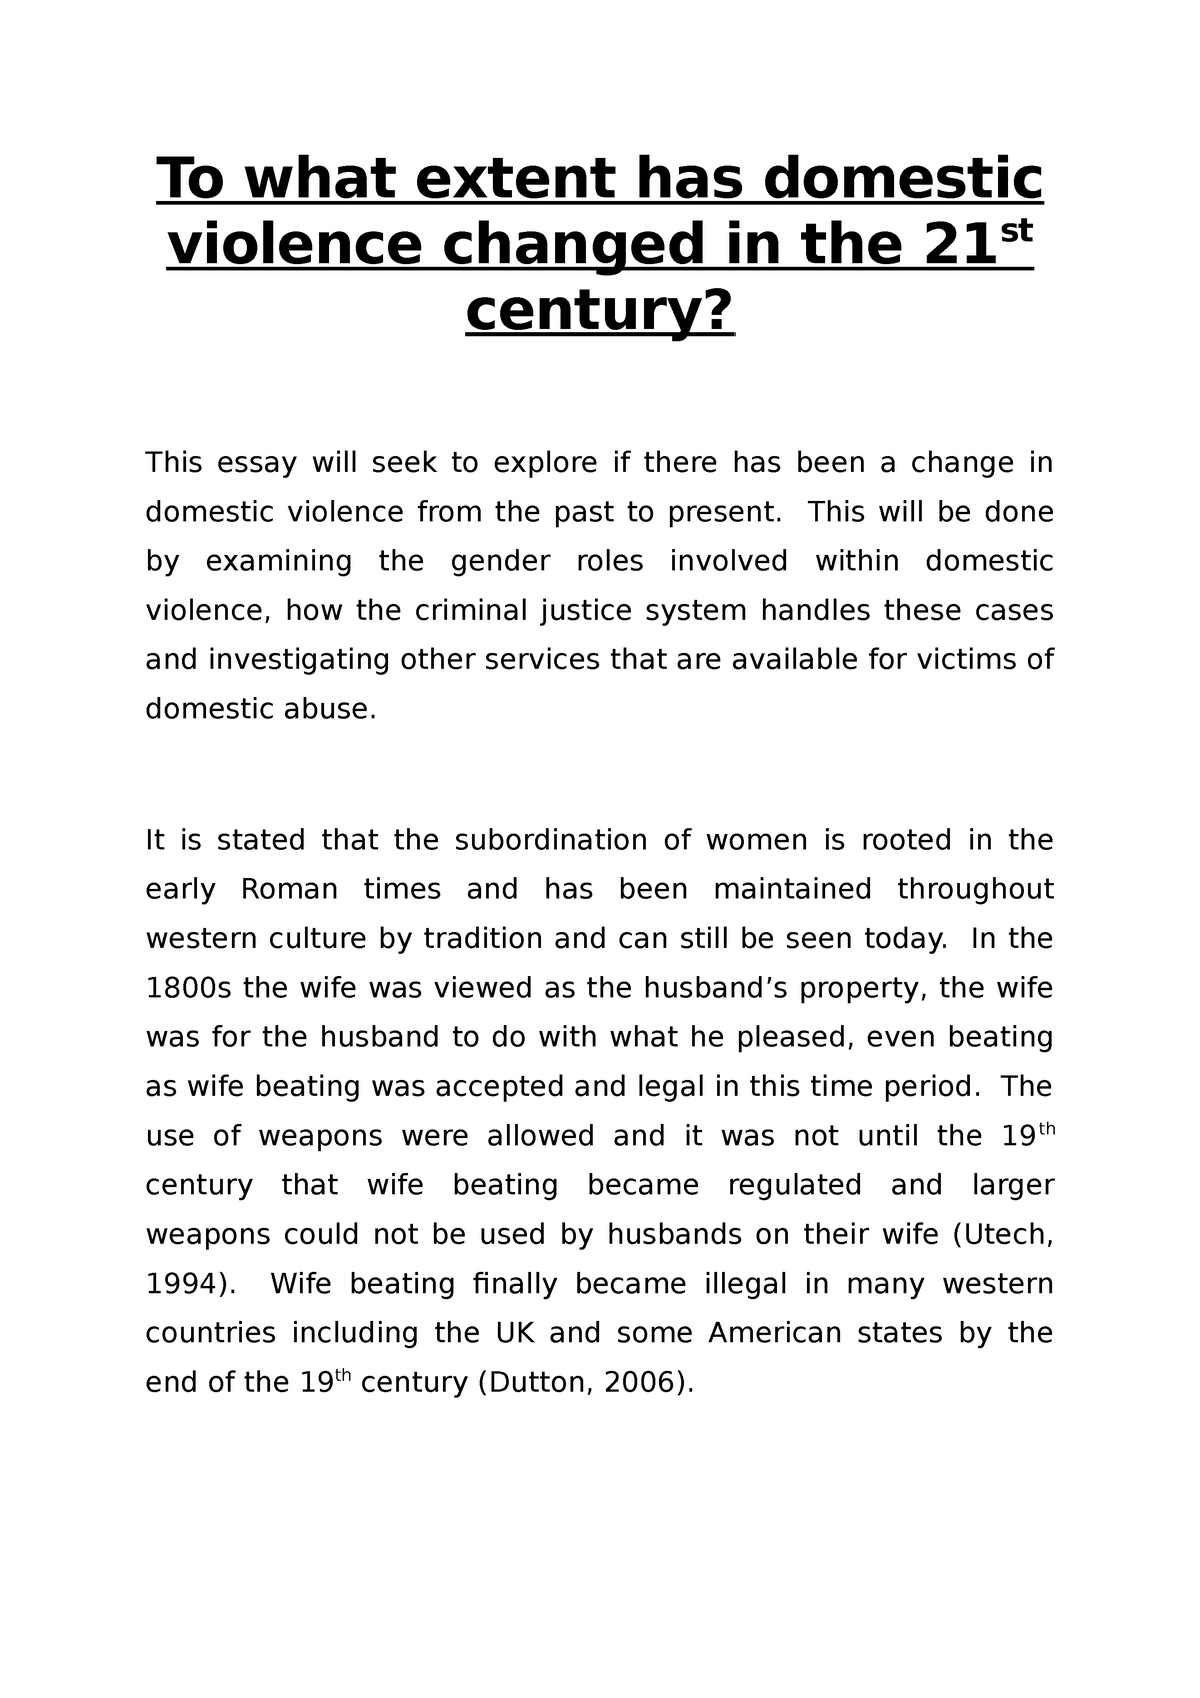 introduction for domestic violence essay